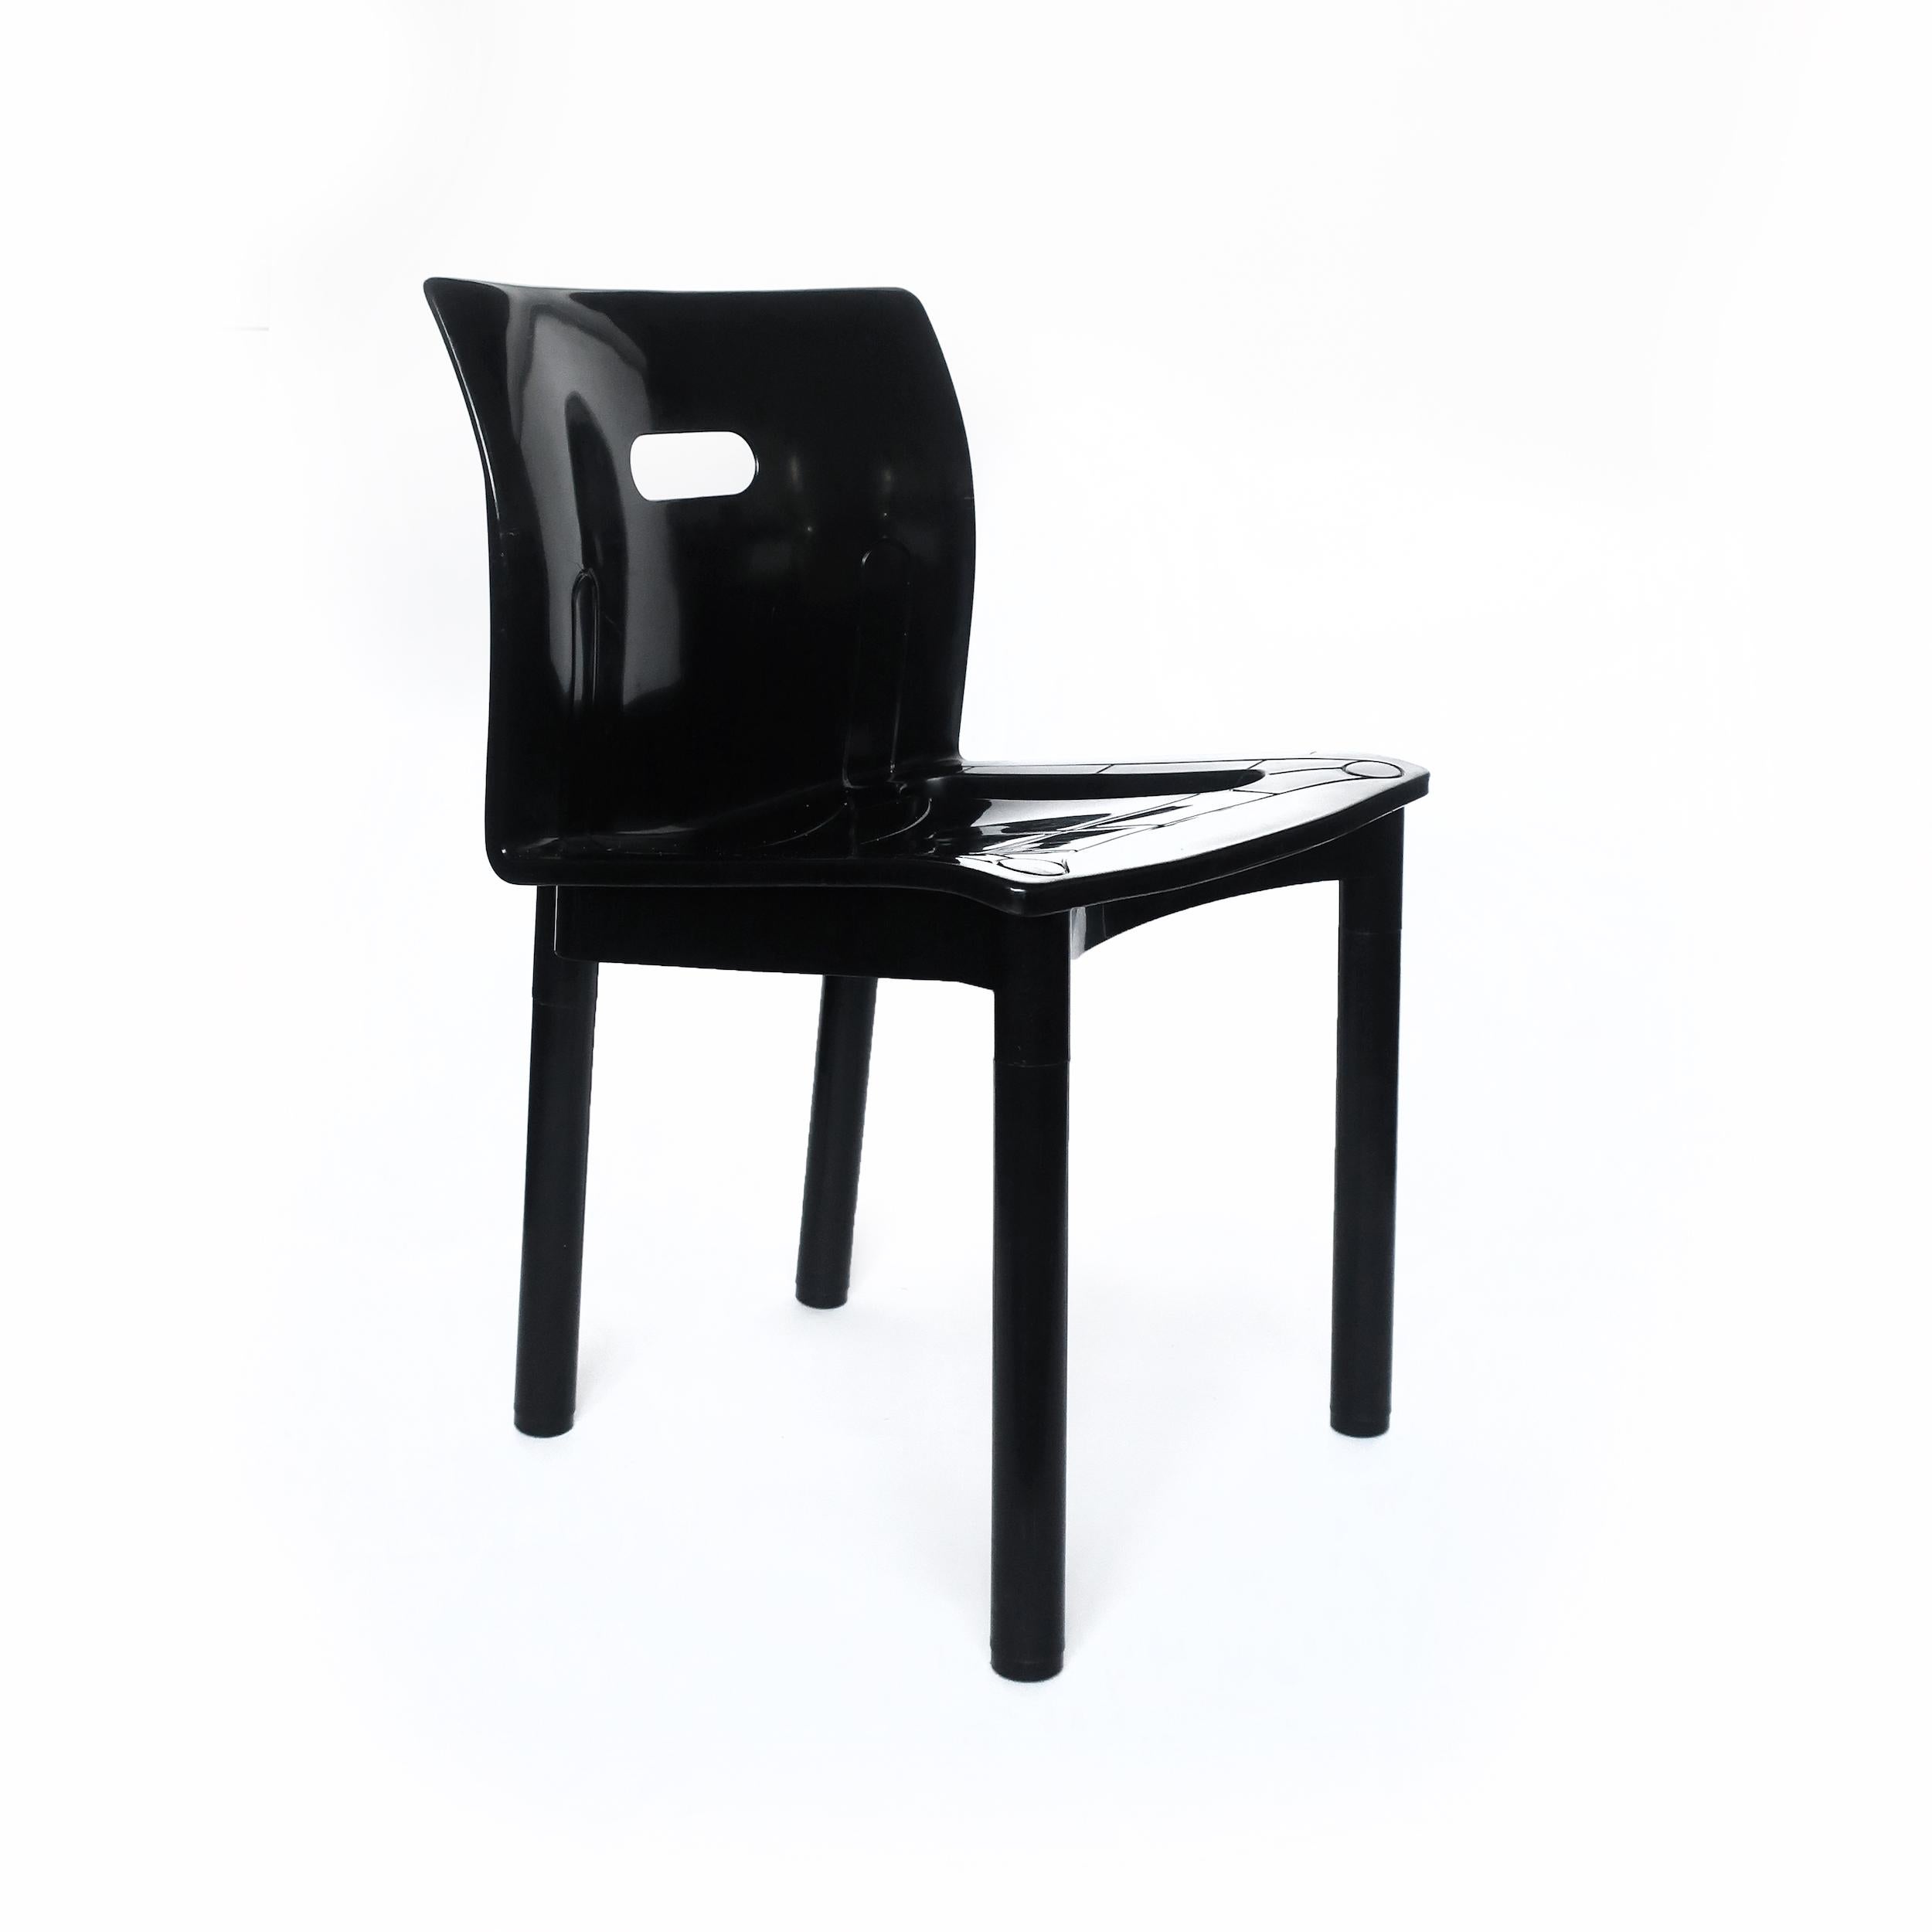 Vintage Black Chair 4870 by Anna Castelli Ferrieri for Kartell In Good Condition For Sale In Brooklyn, NY